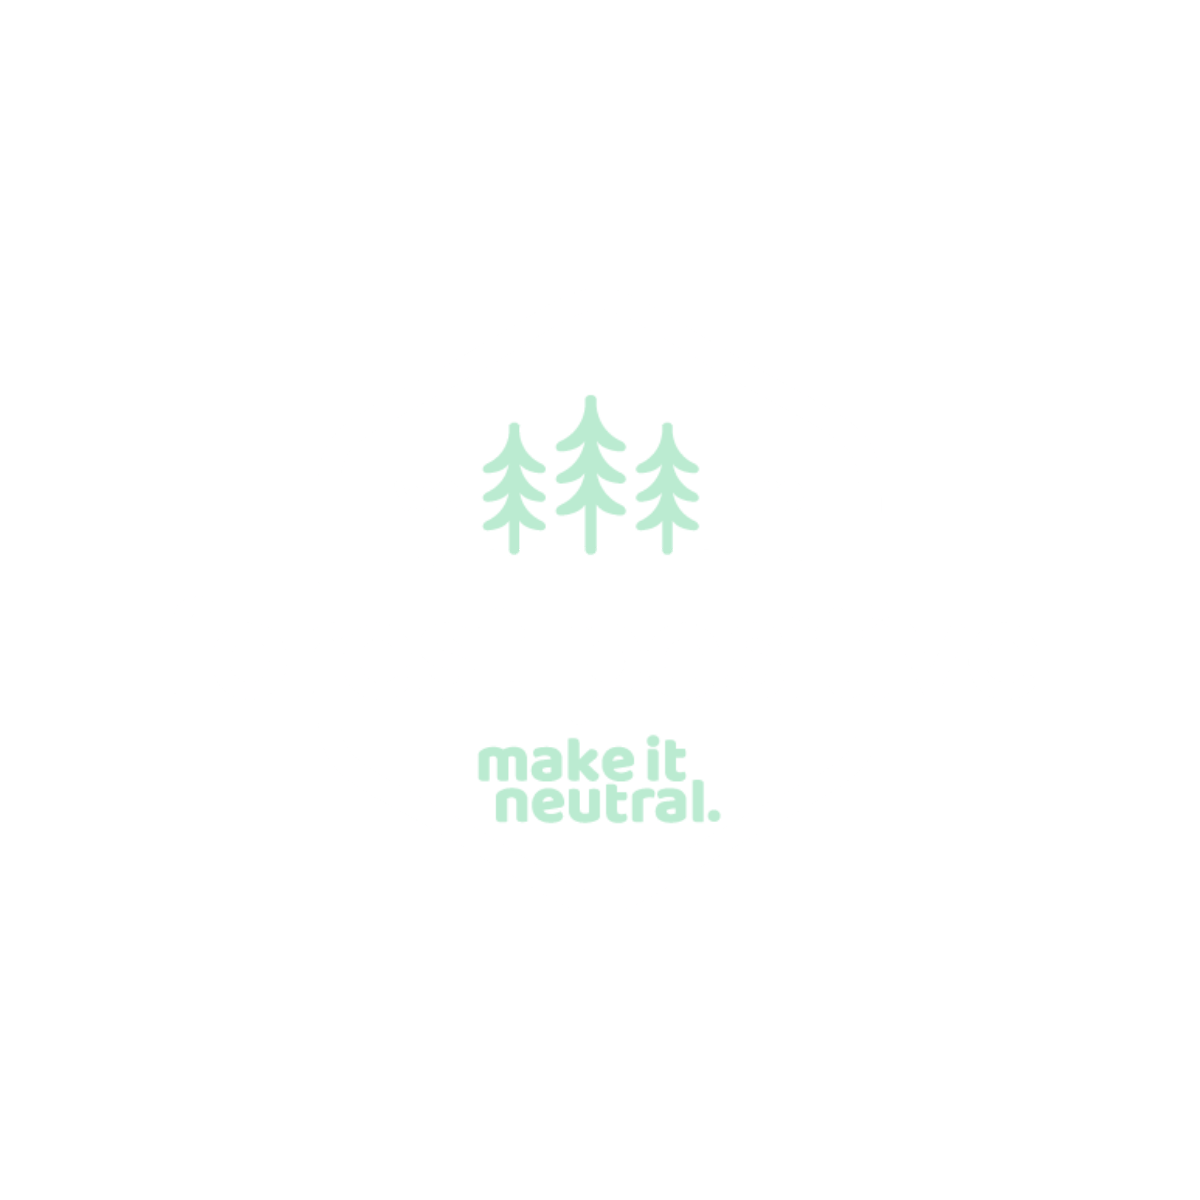 Forest positive, makeitneutral, planting trees